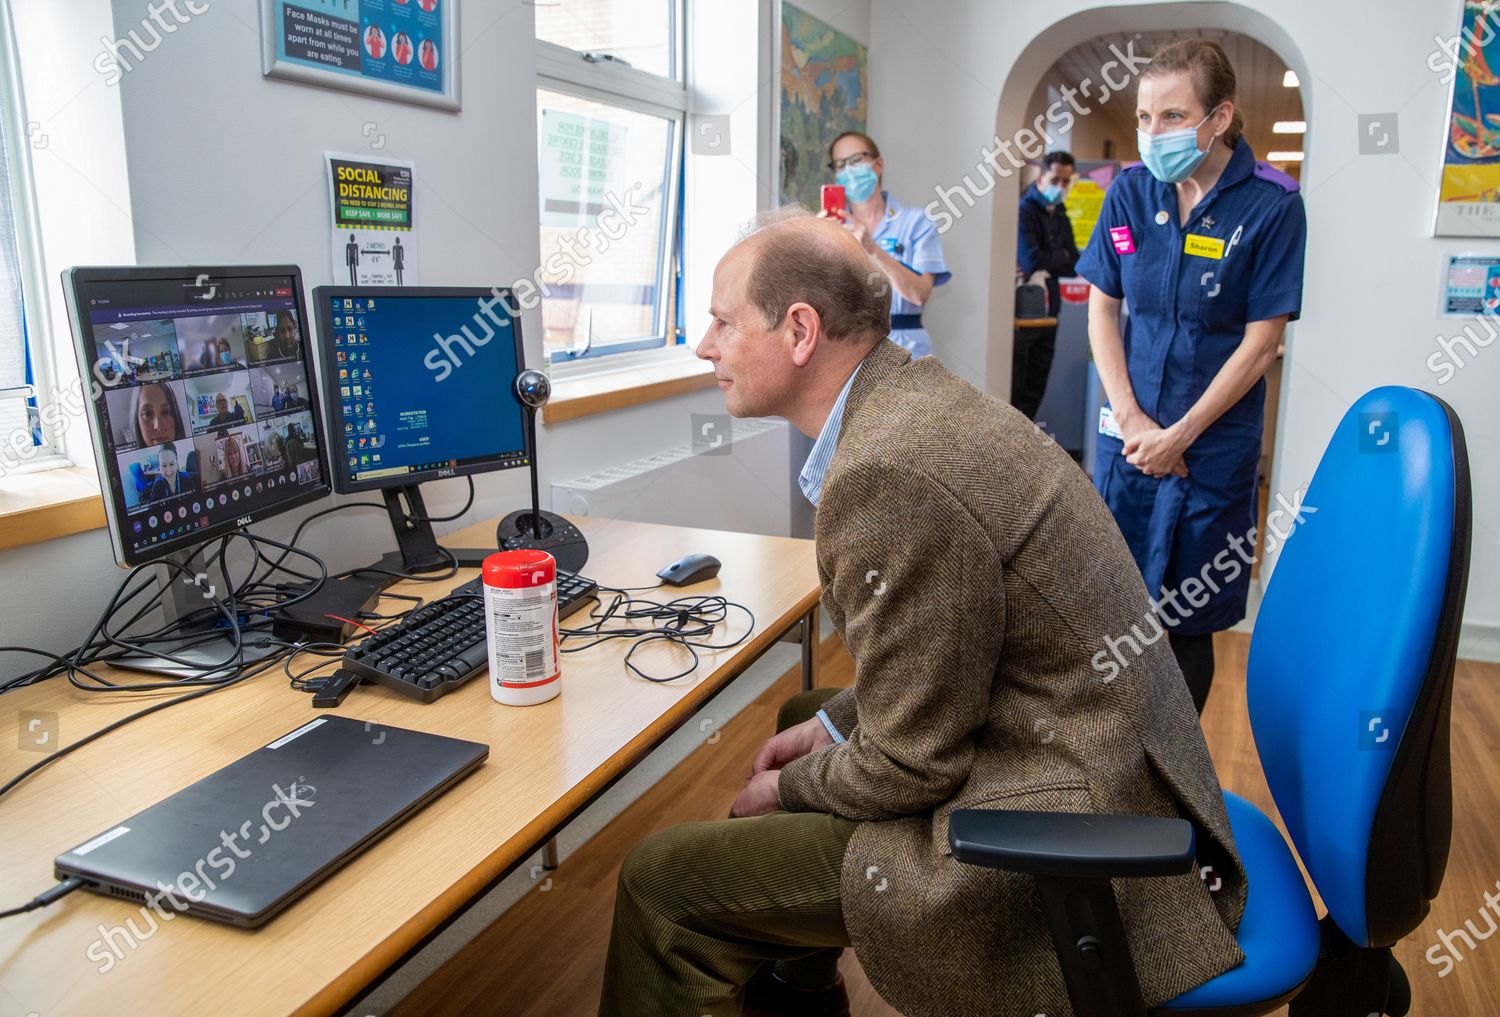 sophie-countess-of-wessex-and-prince-edward-visit-to-frimley-park-hospital-uk-shutterstock-editorial-11900147aq.jpg